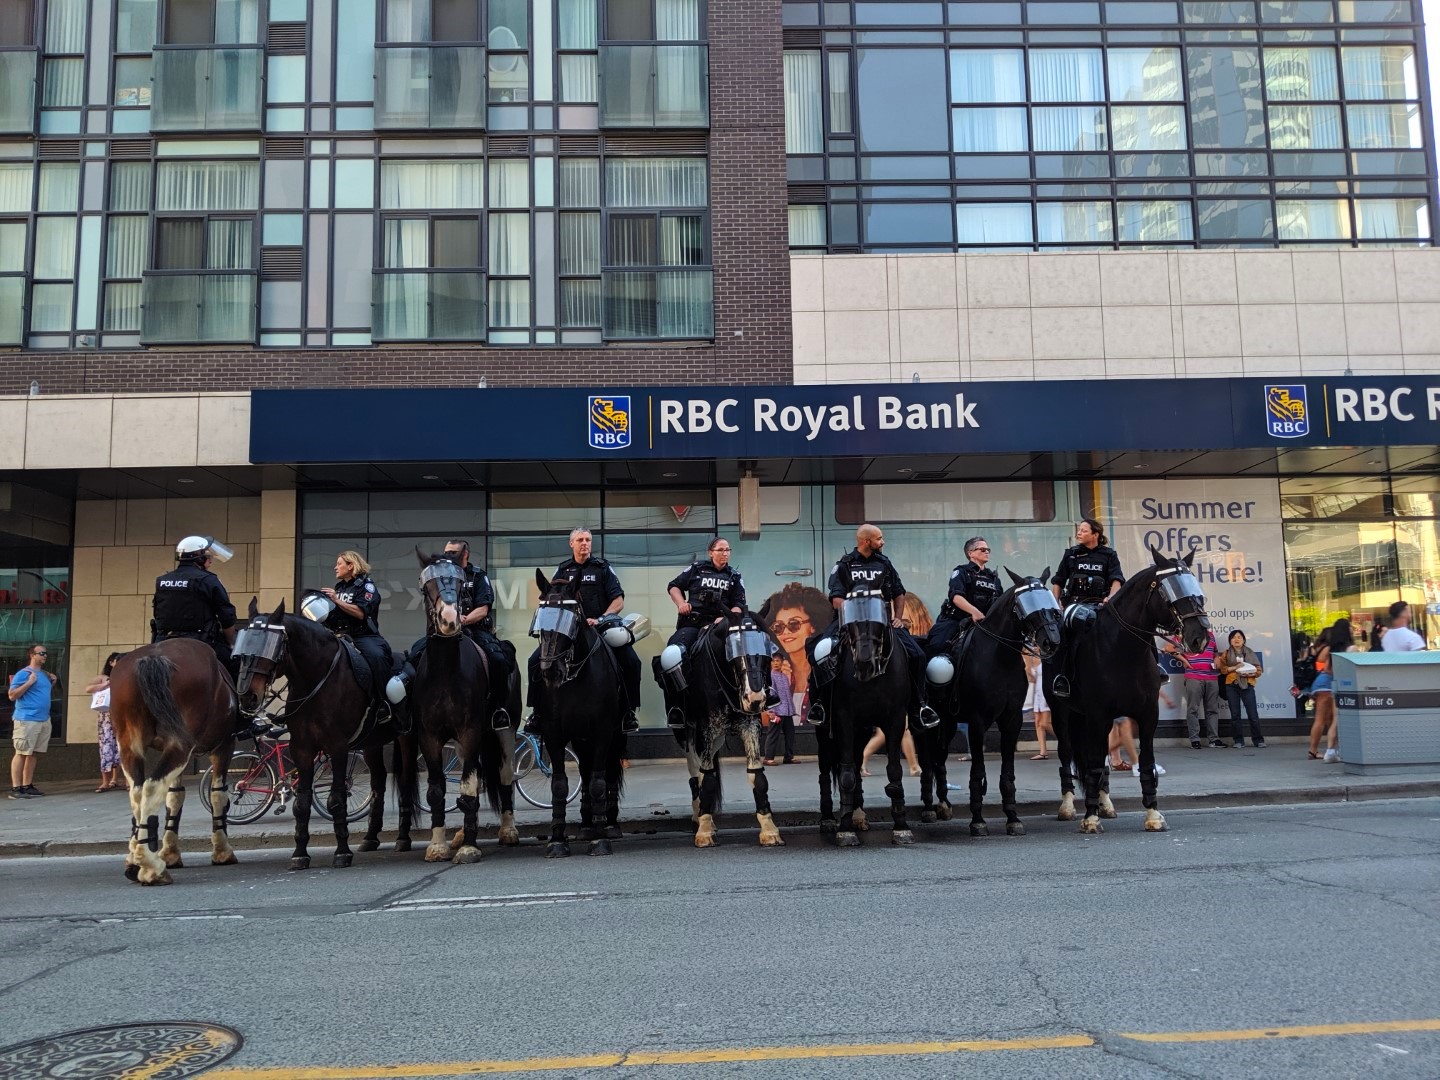 Toronto police on horses in front of RBC